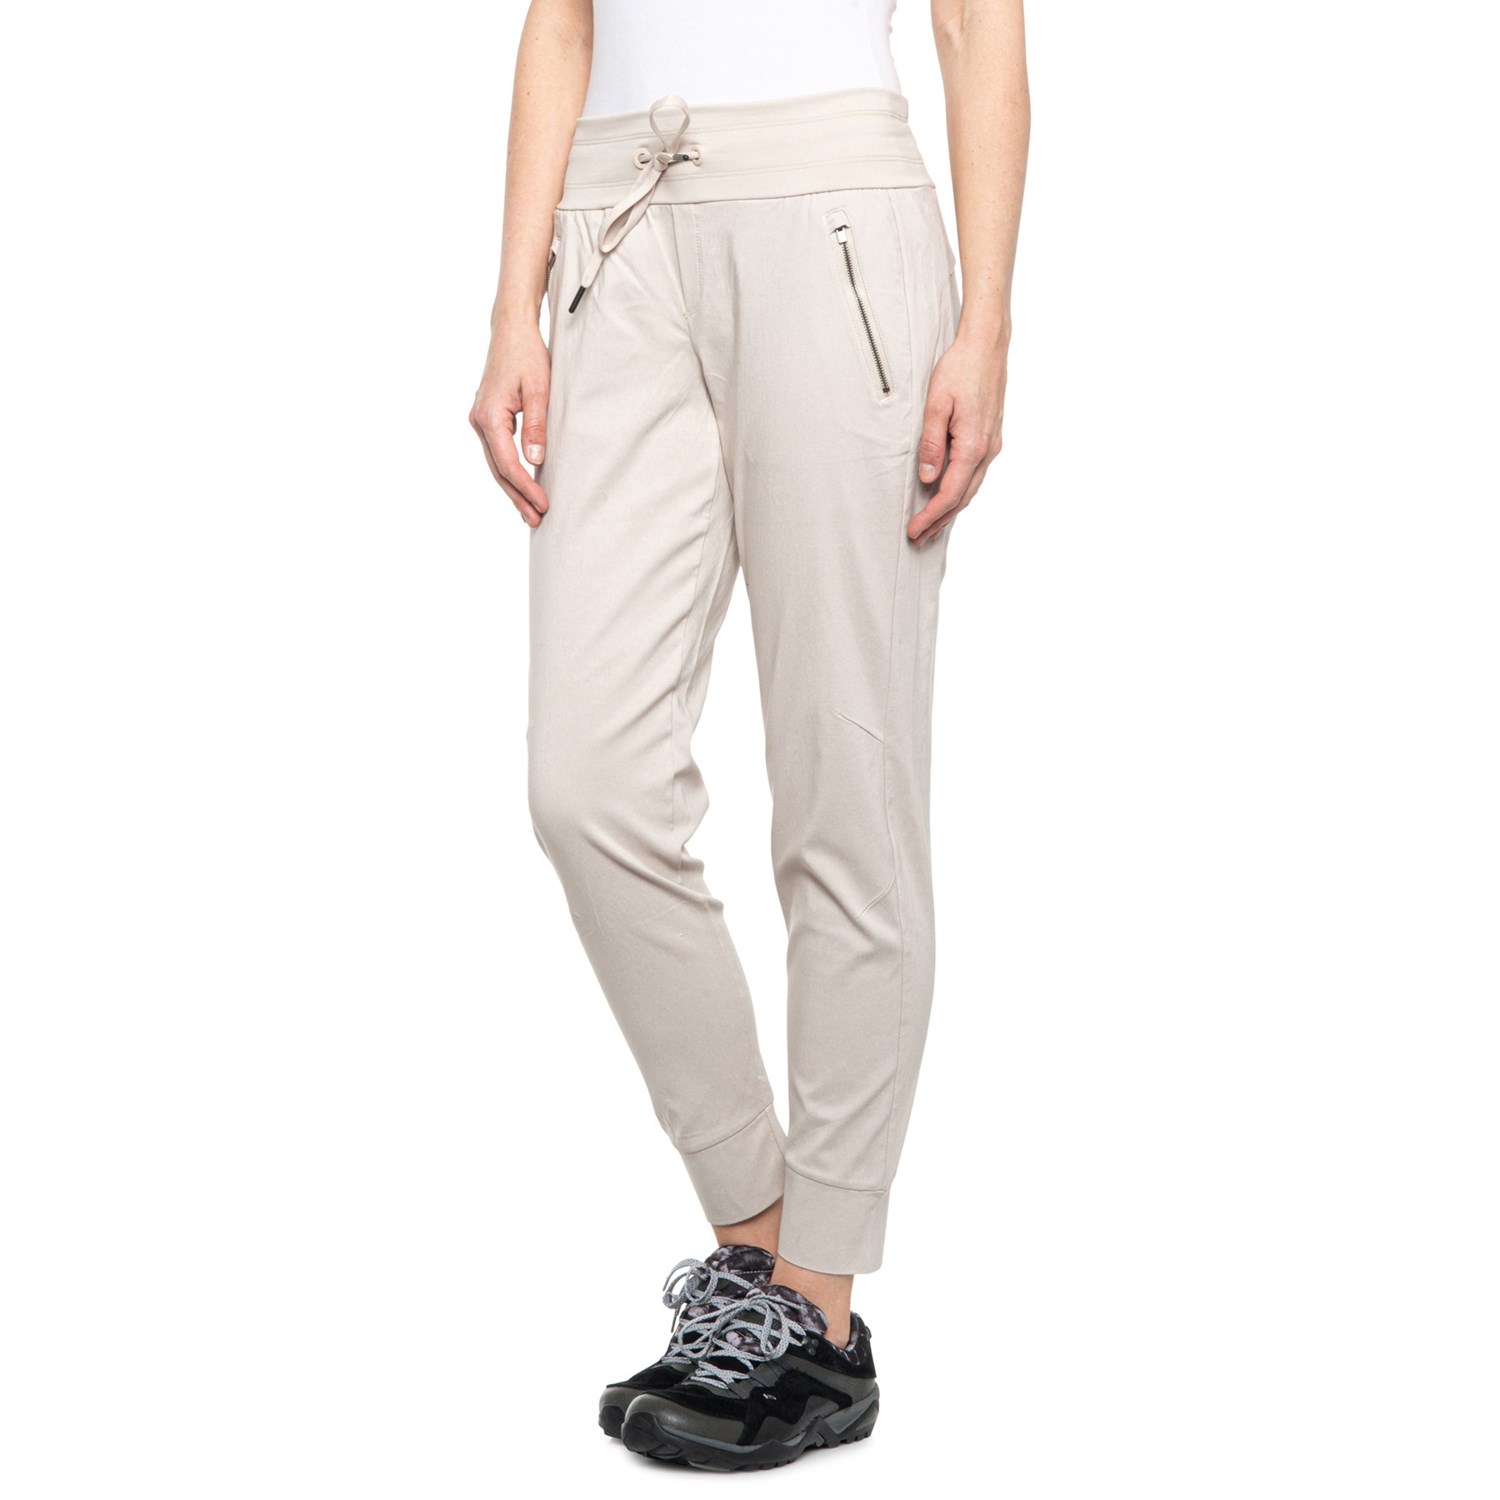 Swiss Alps Trek Stretch Woven Joggers (For Women) - Save 42%